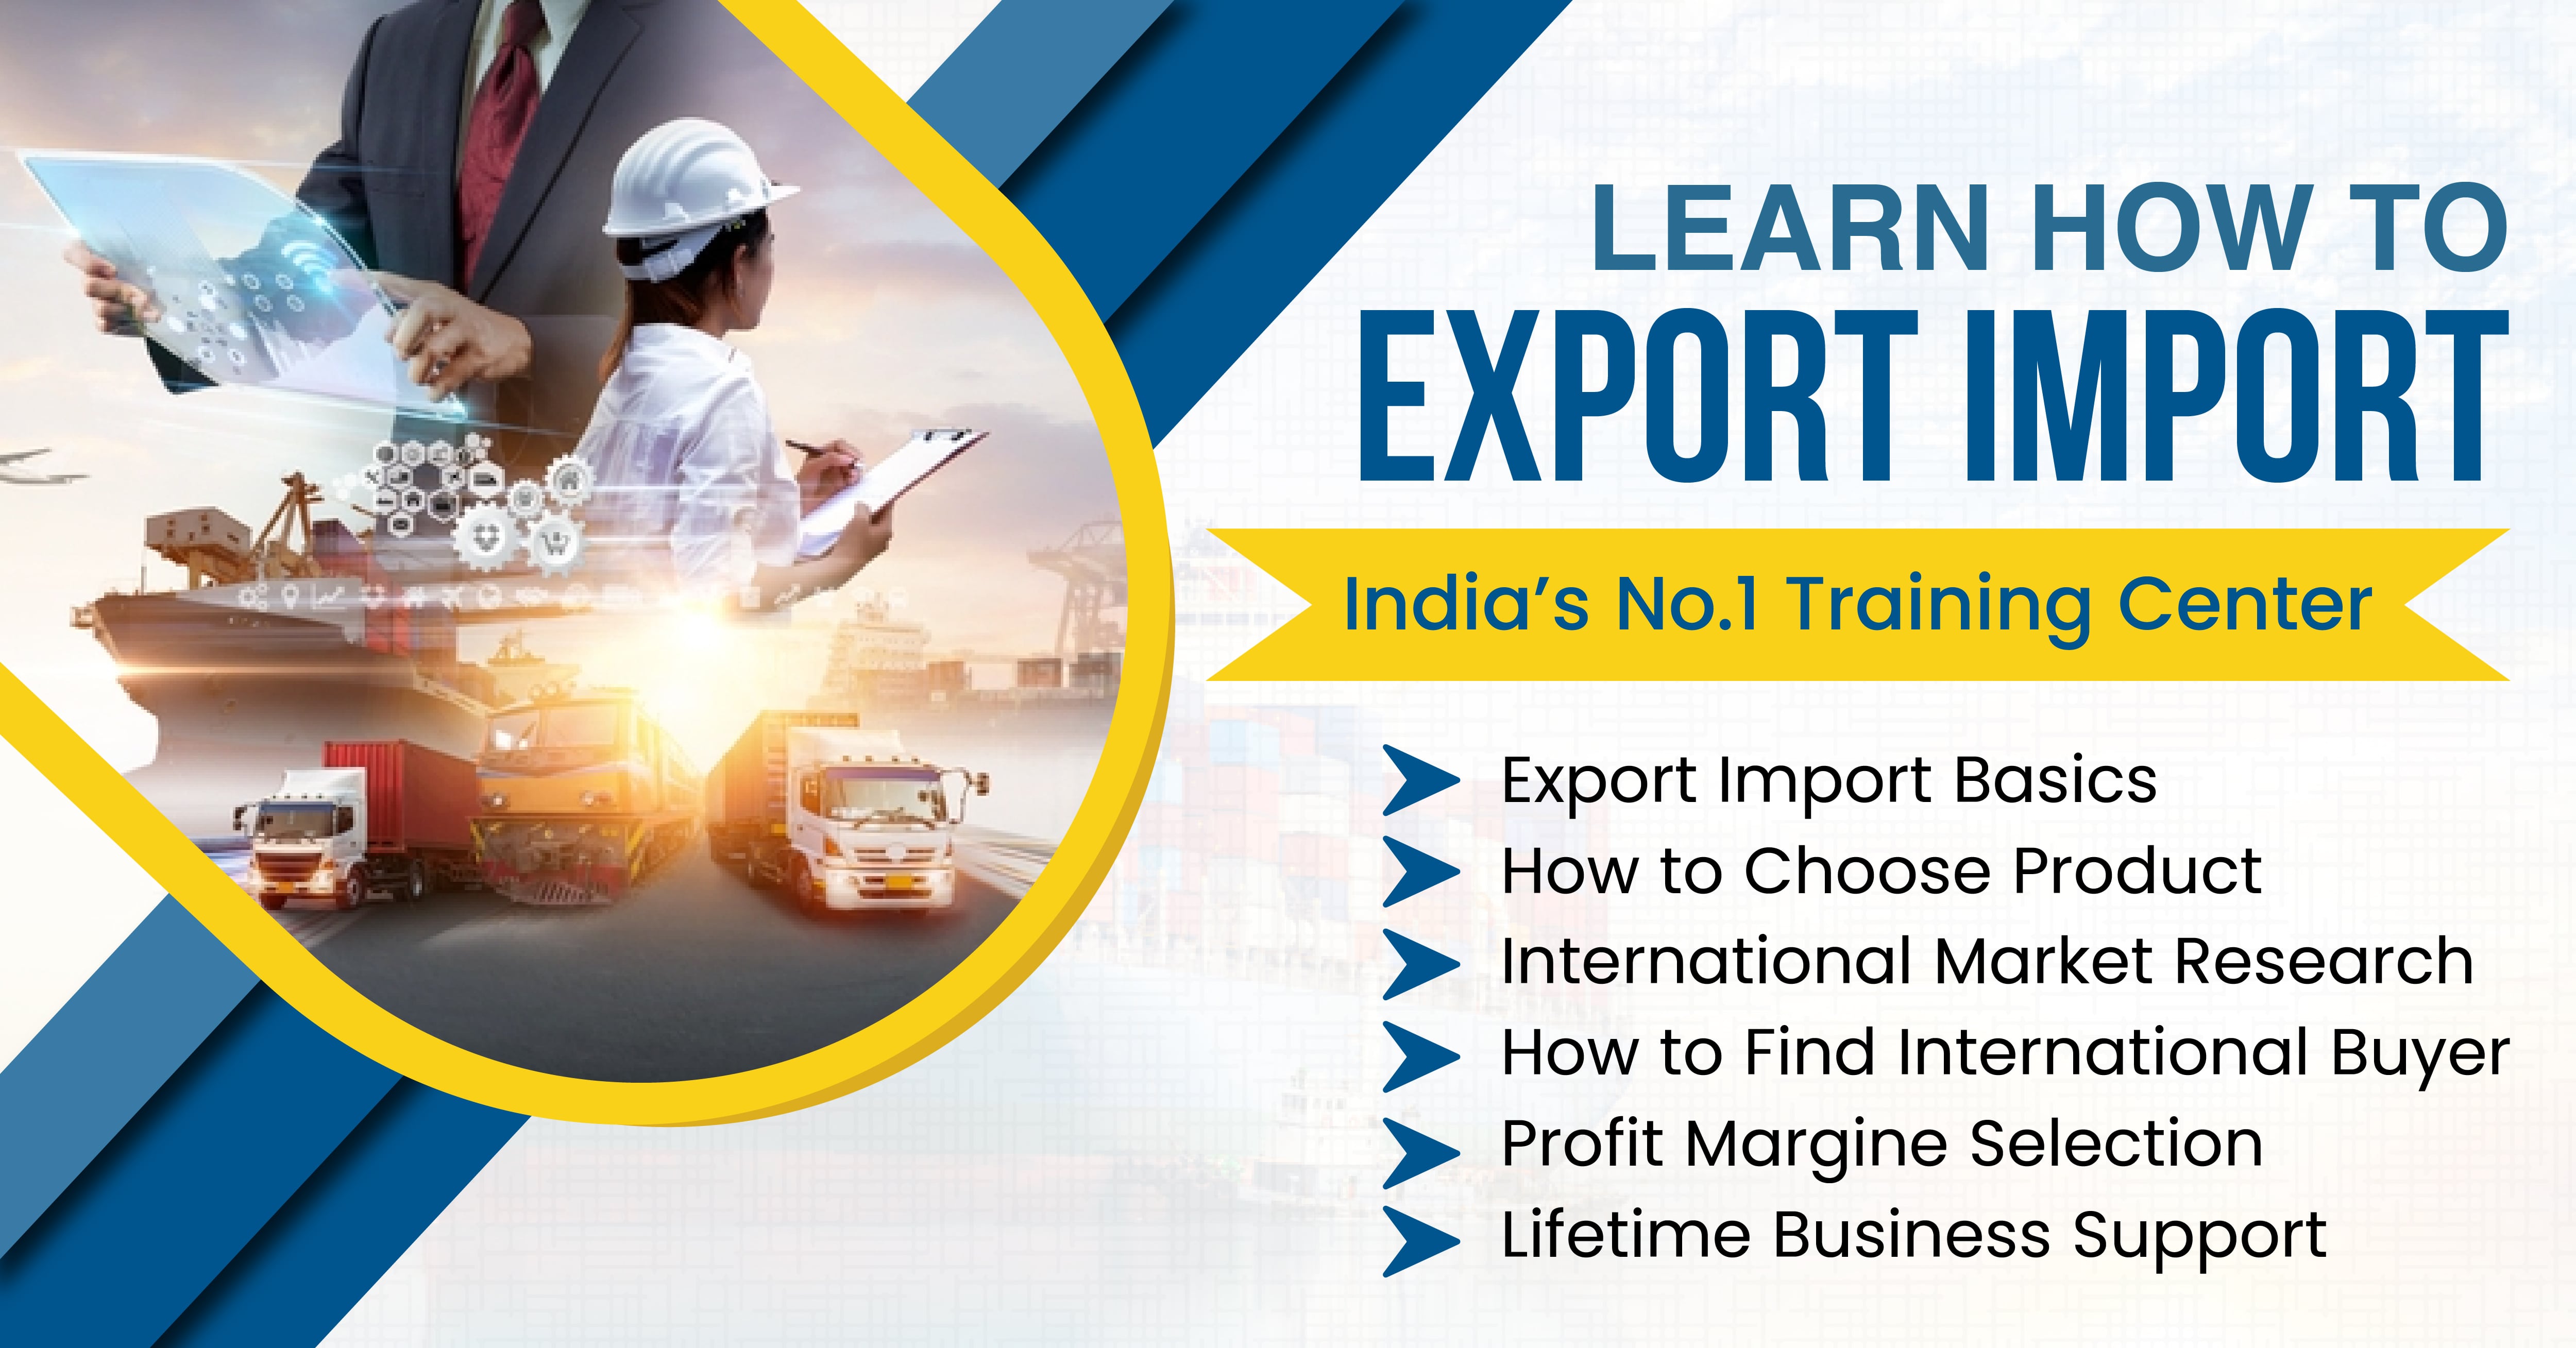 Know the Secrets of Successful Export Import Business in Ludhiana, Ludhiana, Punjab, India